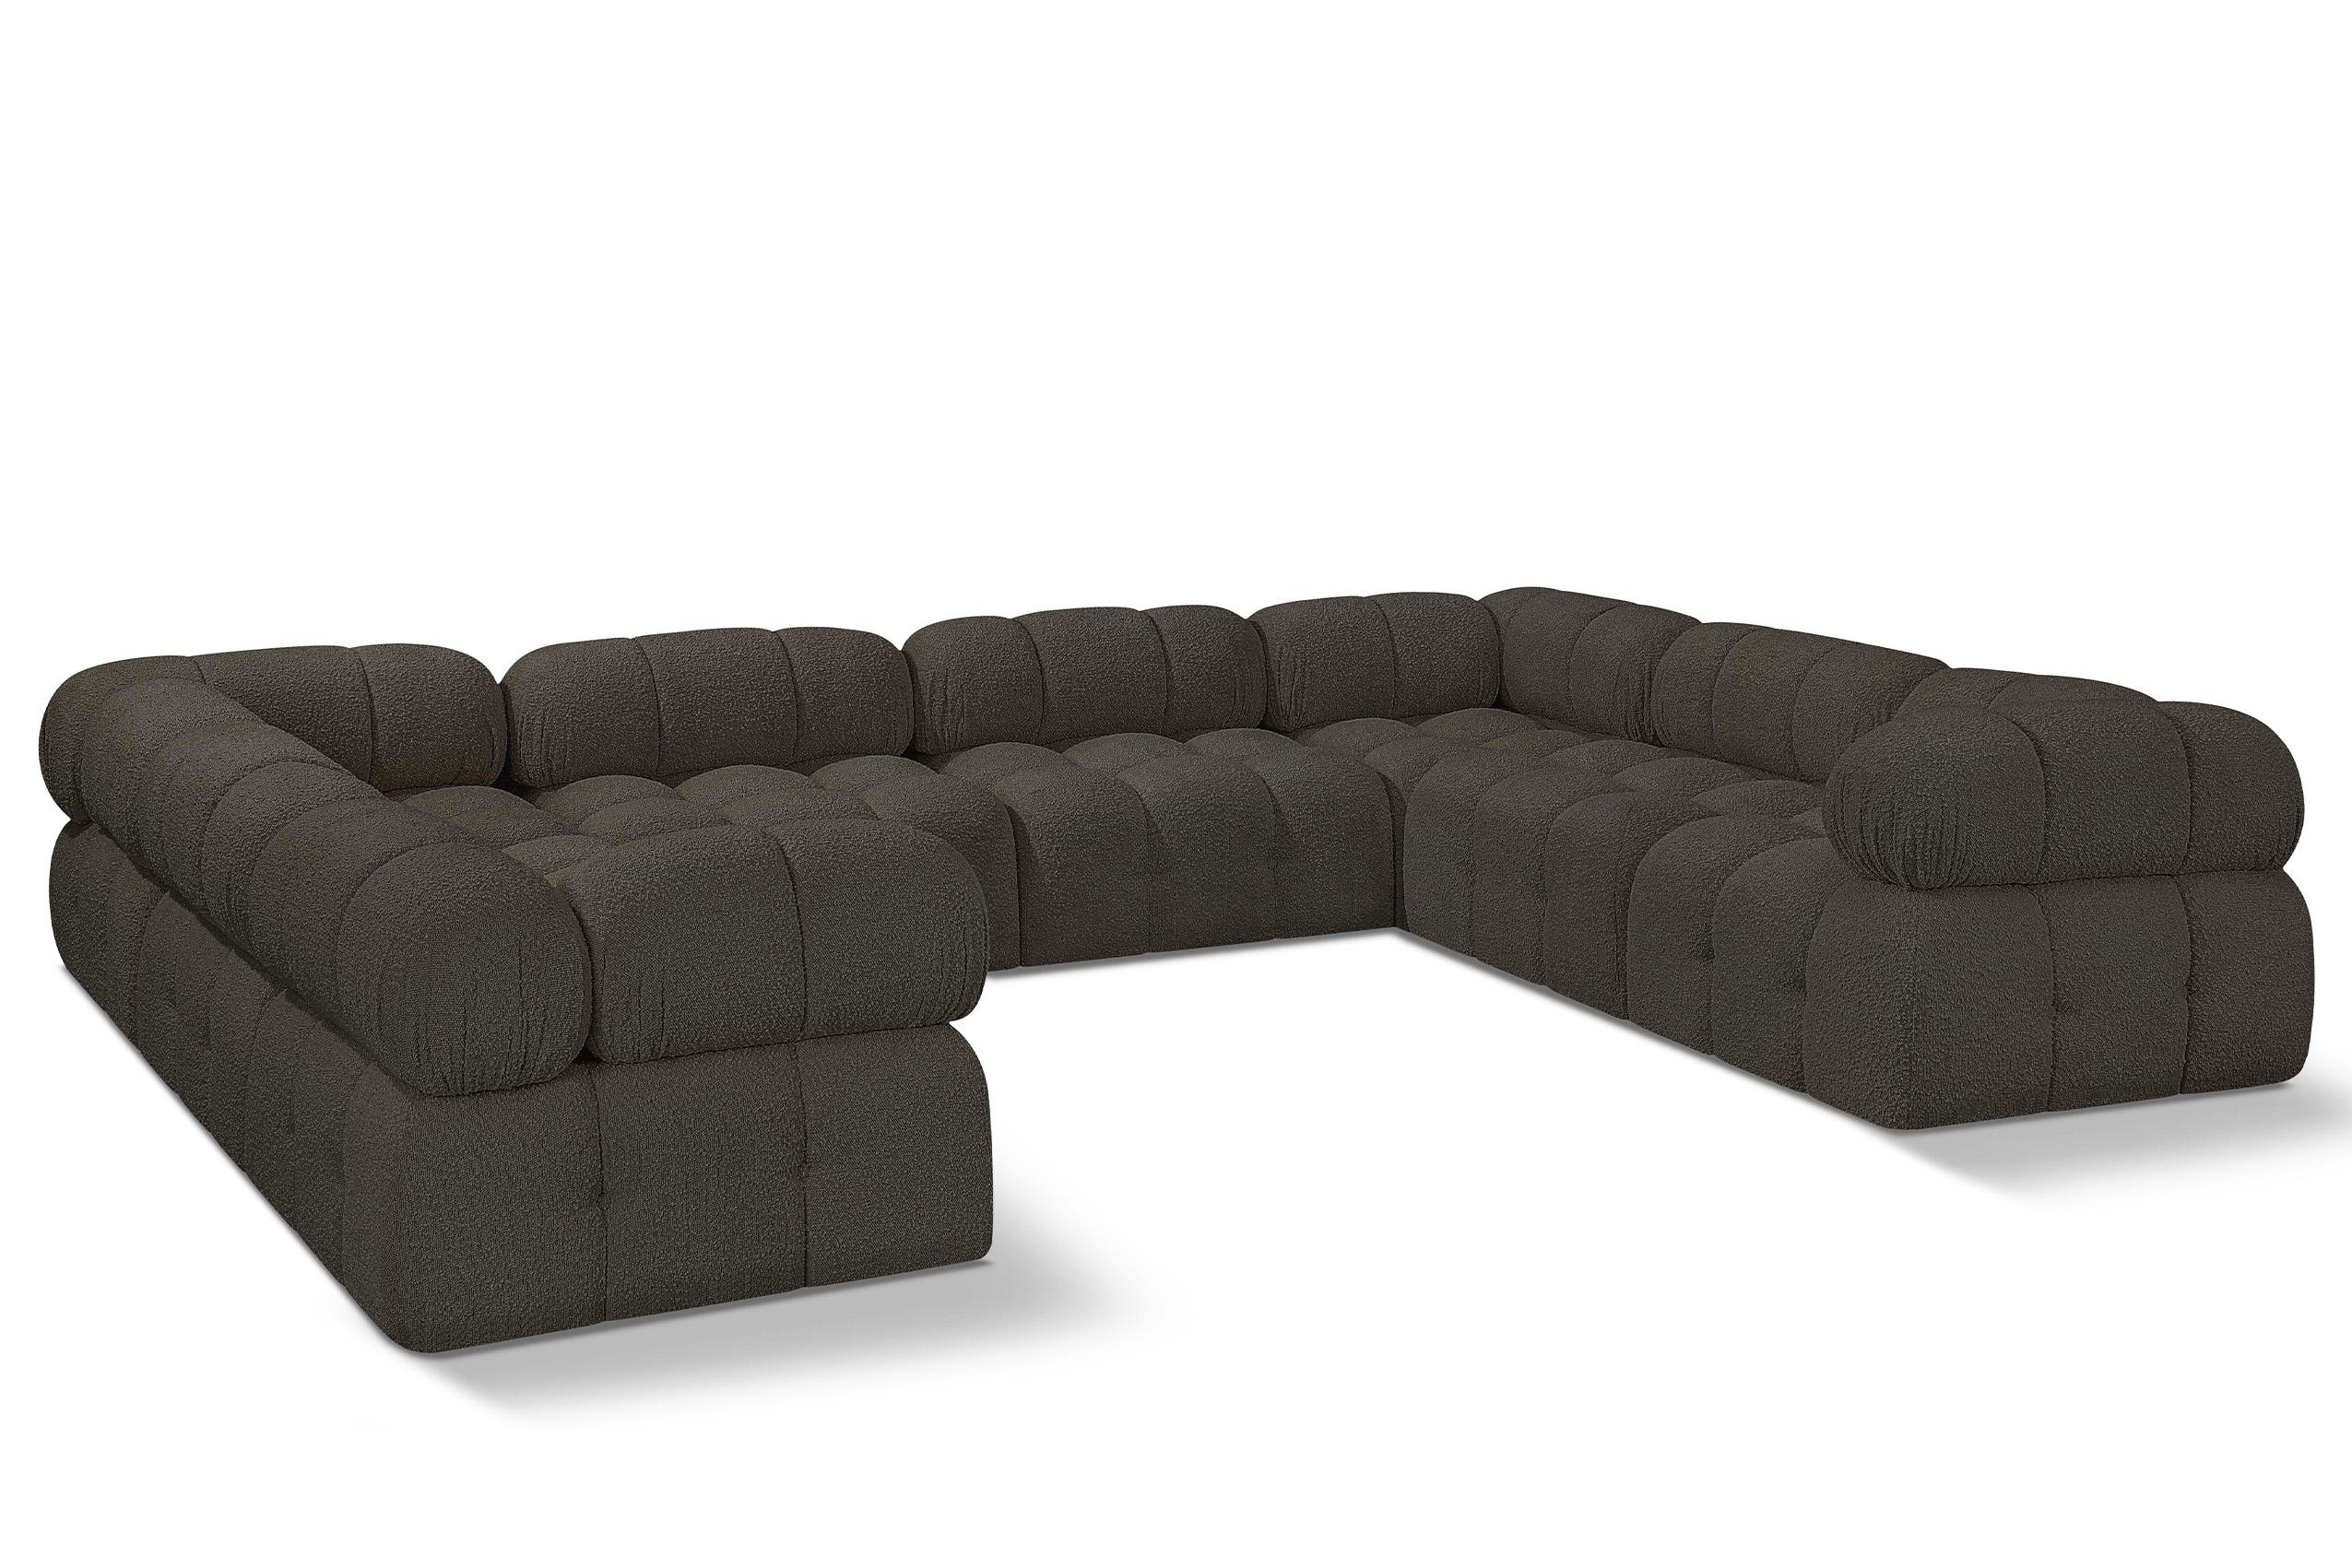 Contemporary, Modern Modular Sectional AMES 611Brown-Sec8A 611Brown-Sec8A in Brown 